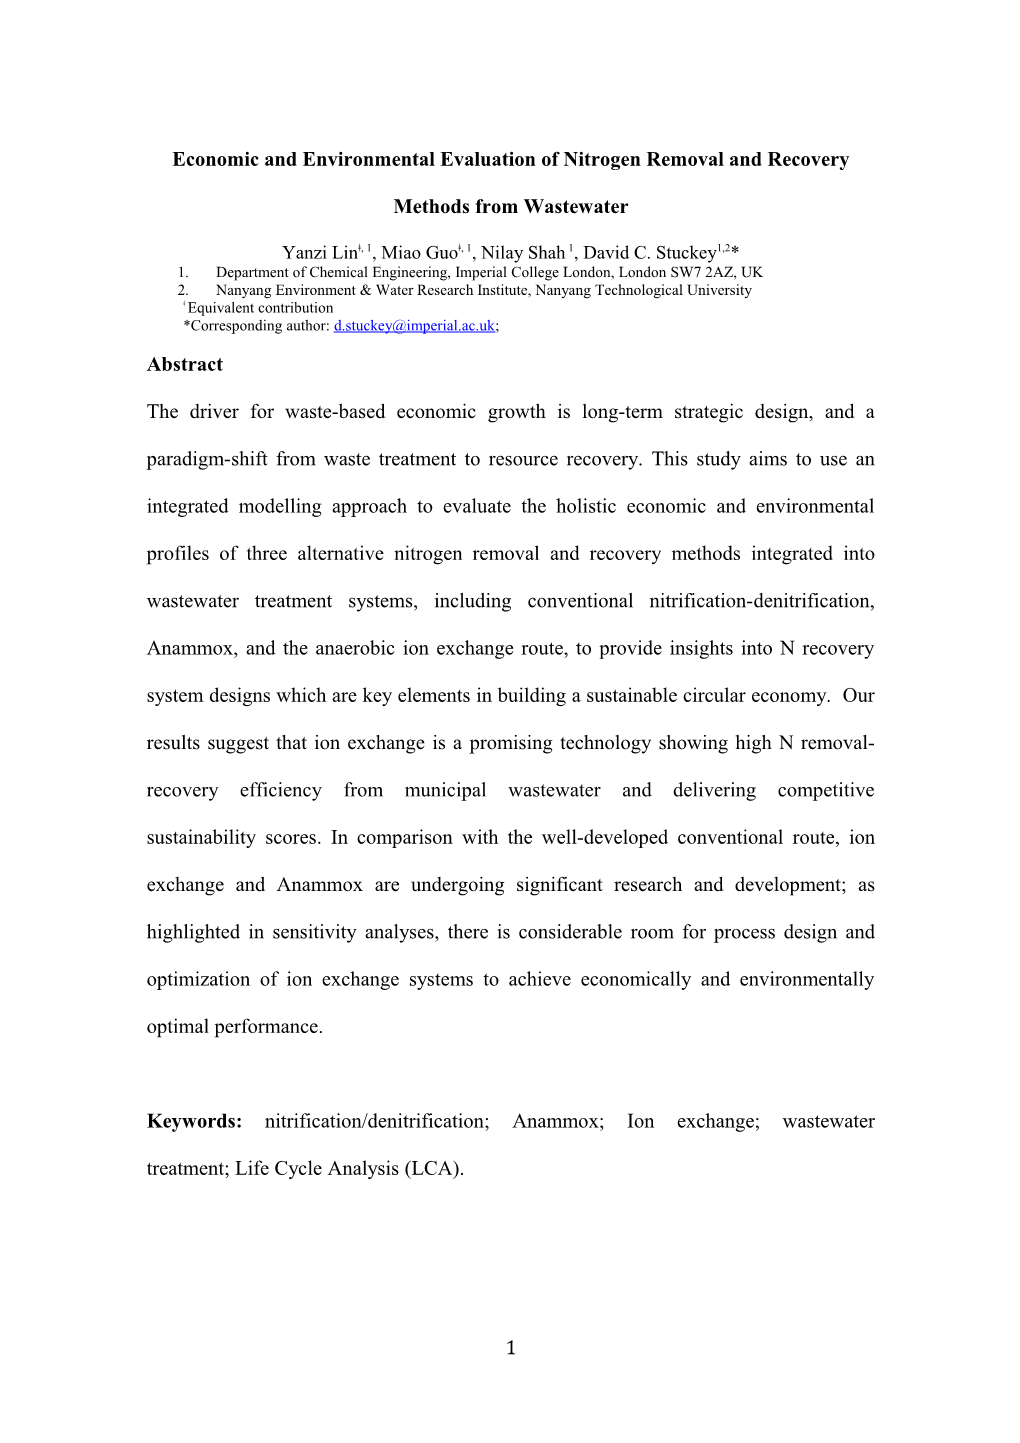 Economic and Environmental Evaluation of Nitrogen Removal and Recovery Methods from Wastewater